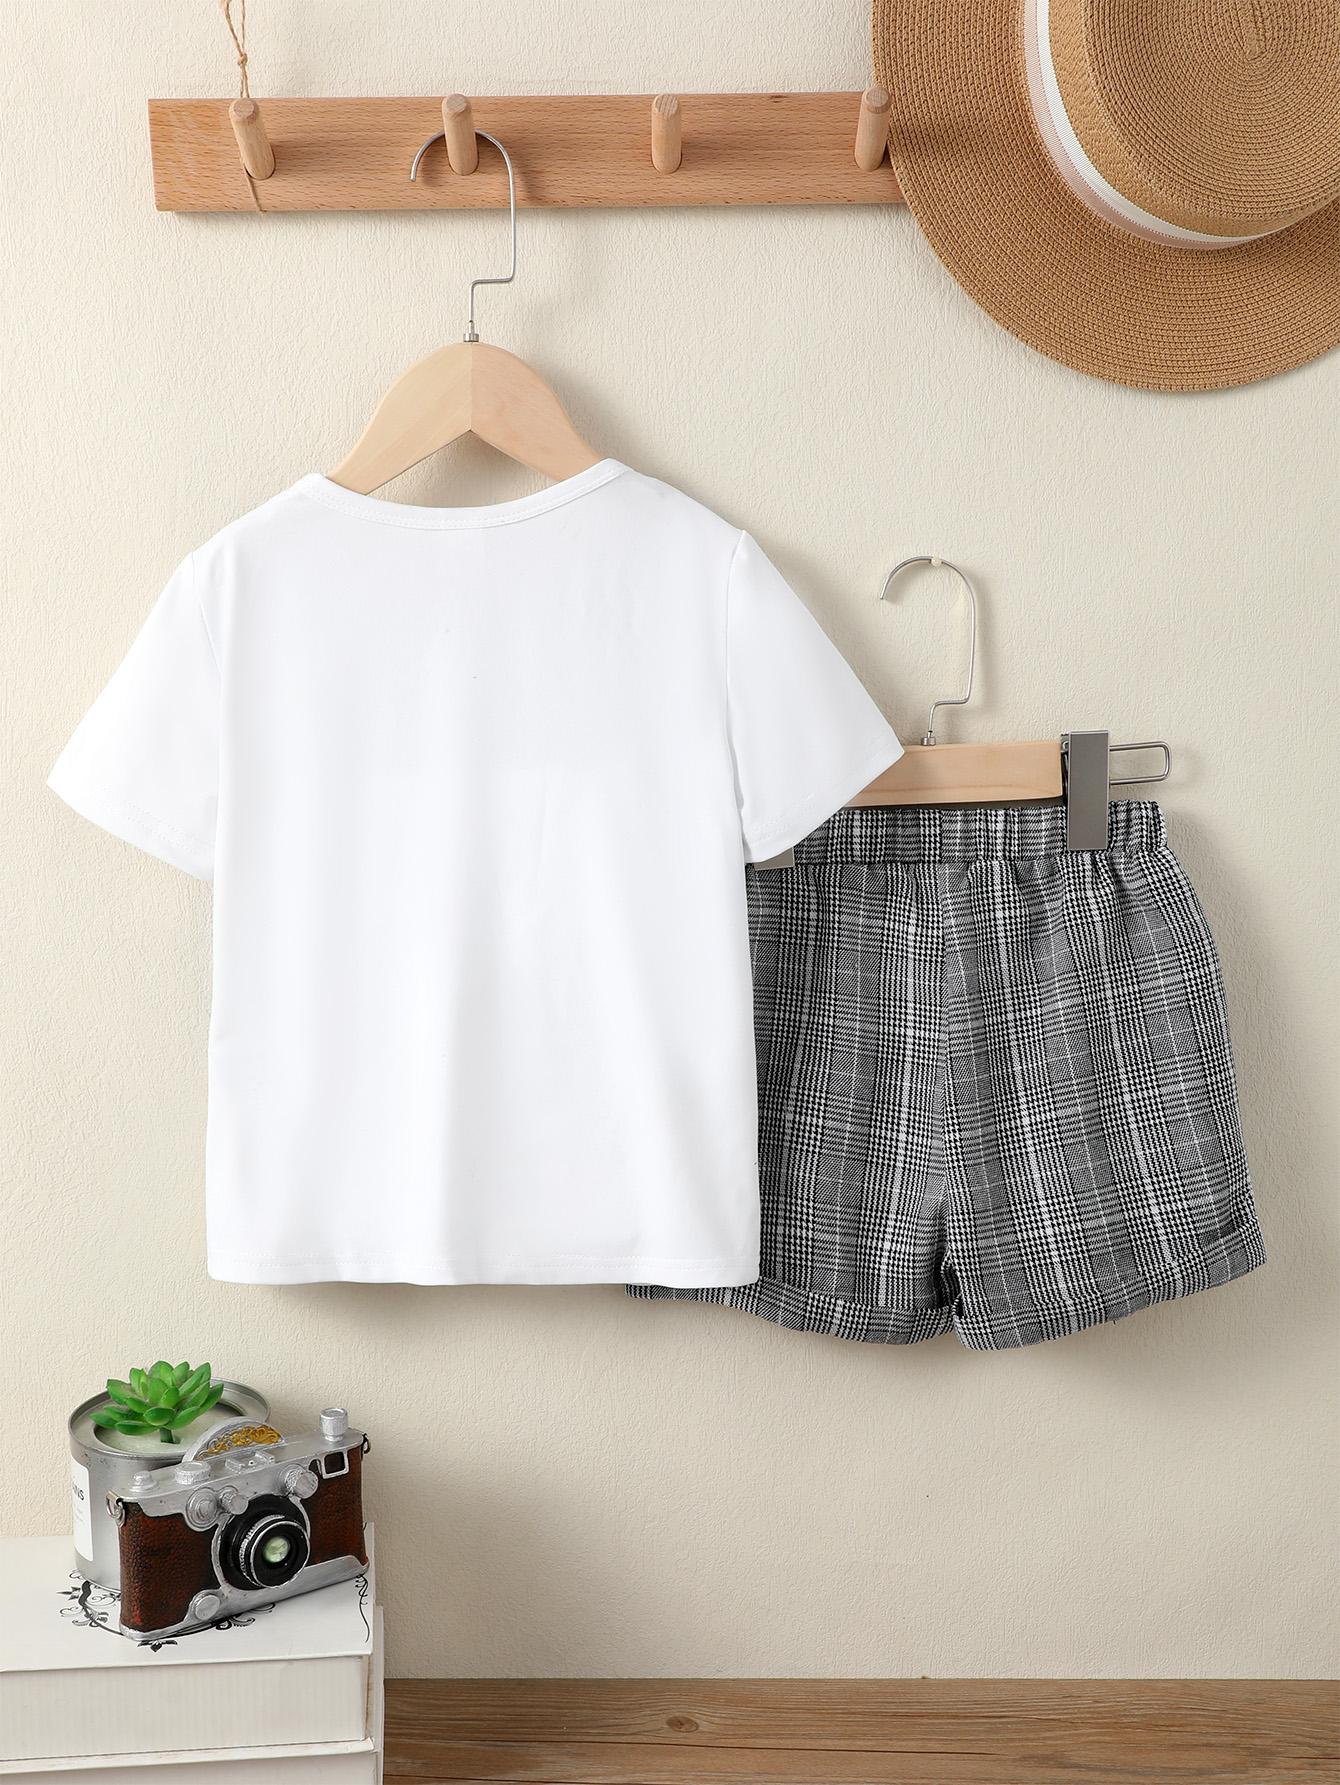 4-7Y Kids Fashion Boys Clothes Baby Gentle Outfits Plaid Short Sleeve Tops Shorts White Catpapa 112211156